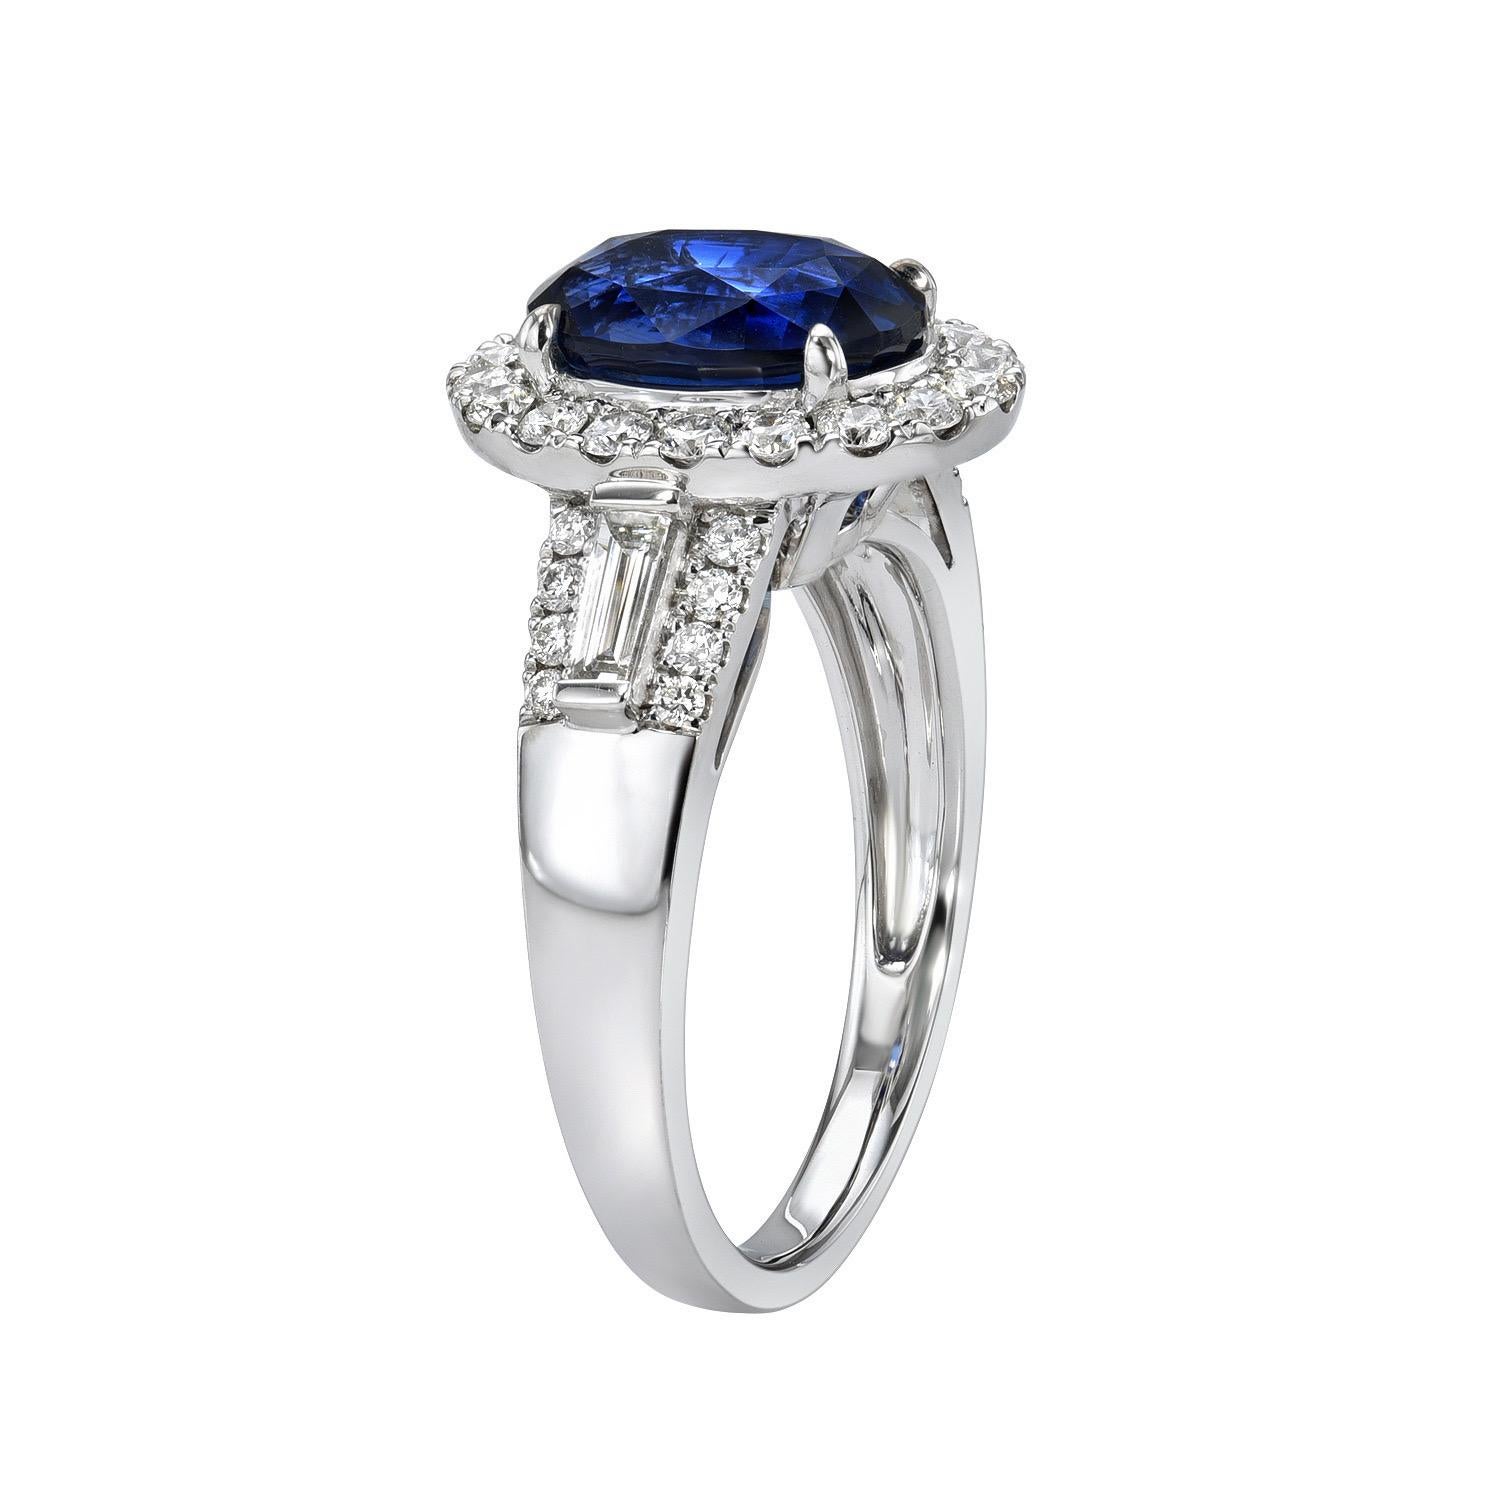 Marvelous Royal Blue 3.05 carat Sapphire oval, 18K white gold ring, decorated with a pair of 0.20 carat total G-H/VS baguette diamonds, and a total of 0.52 carat round brilliant diamonds.
Ring size 6.5. Resizing is complementary upon